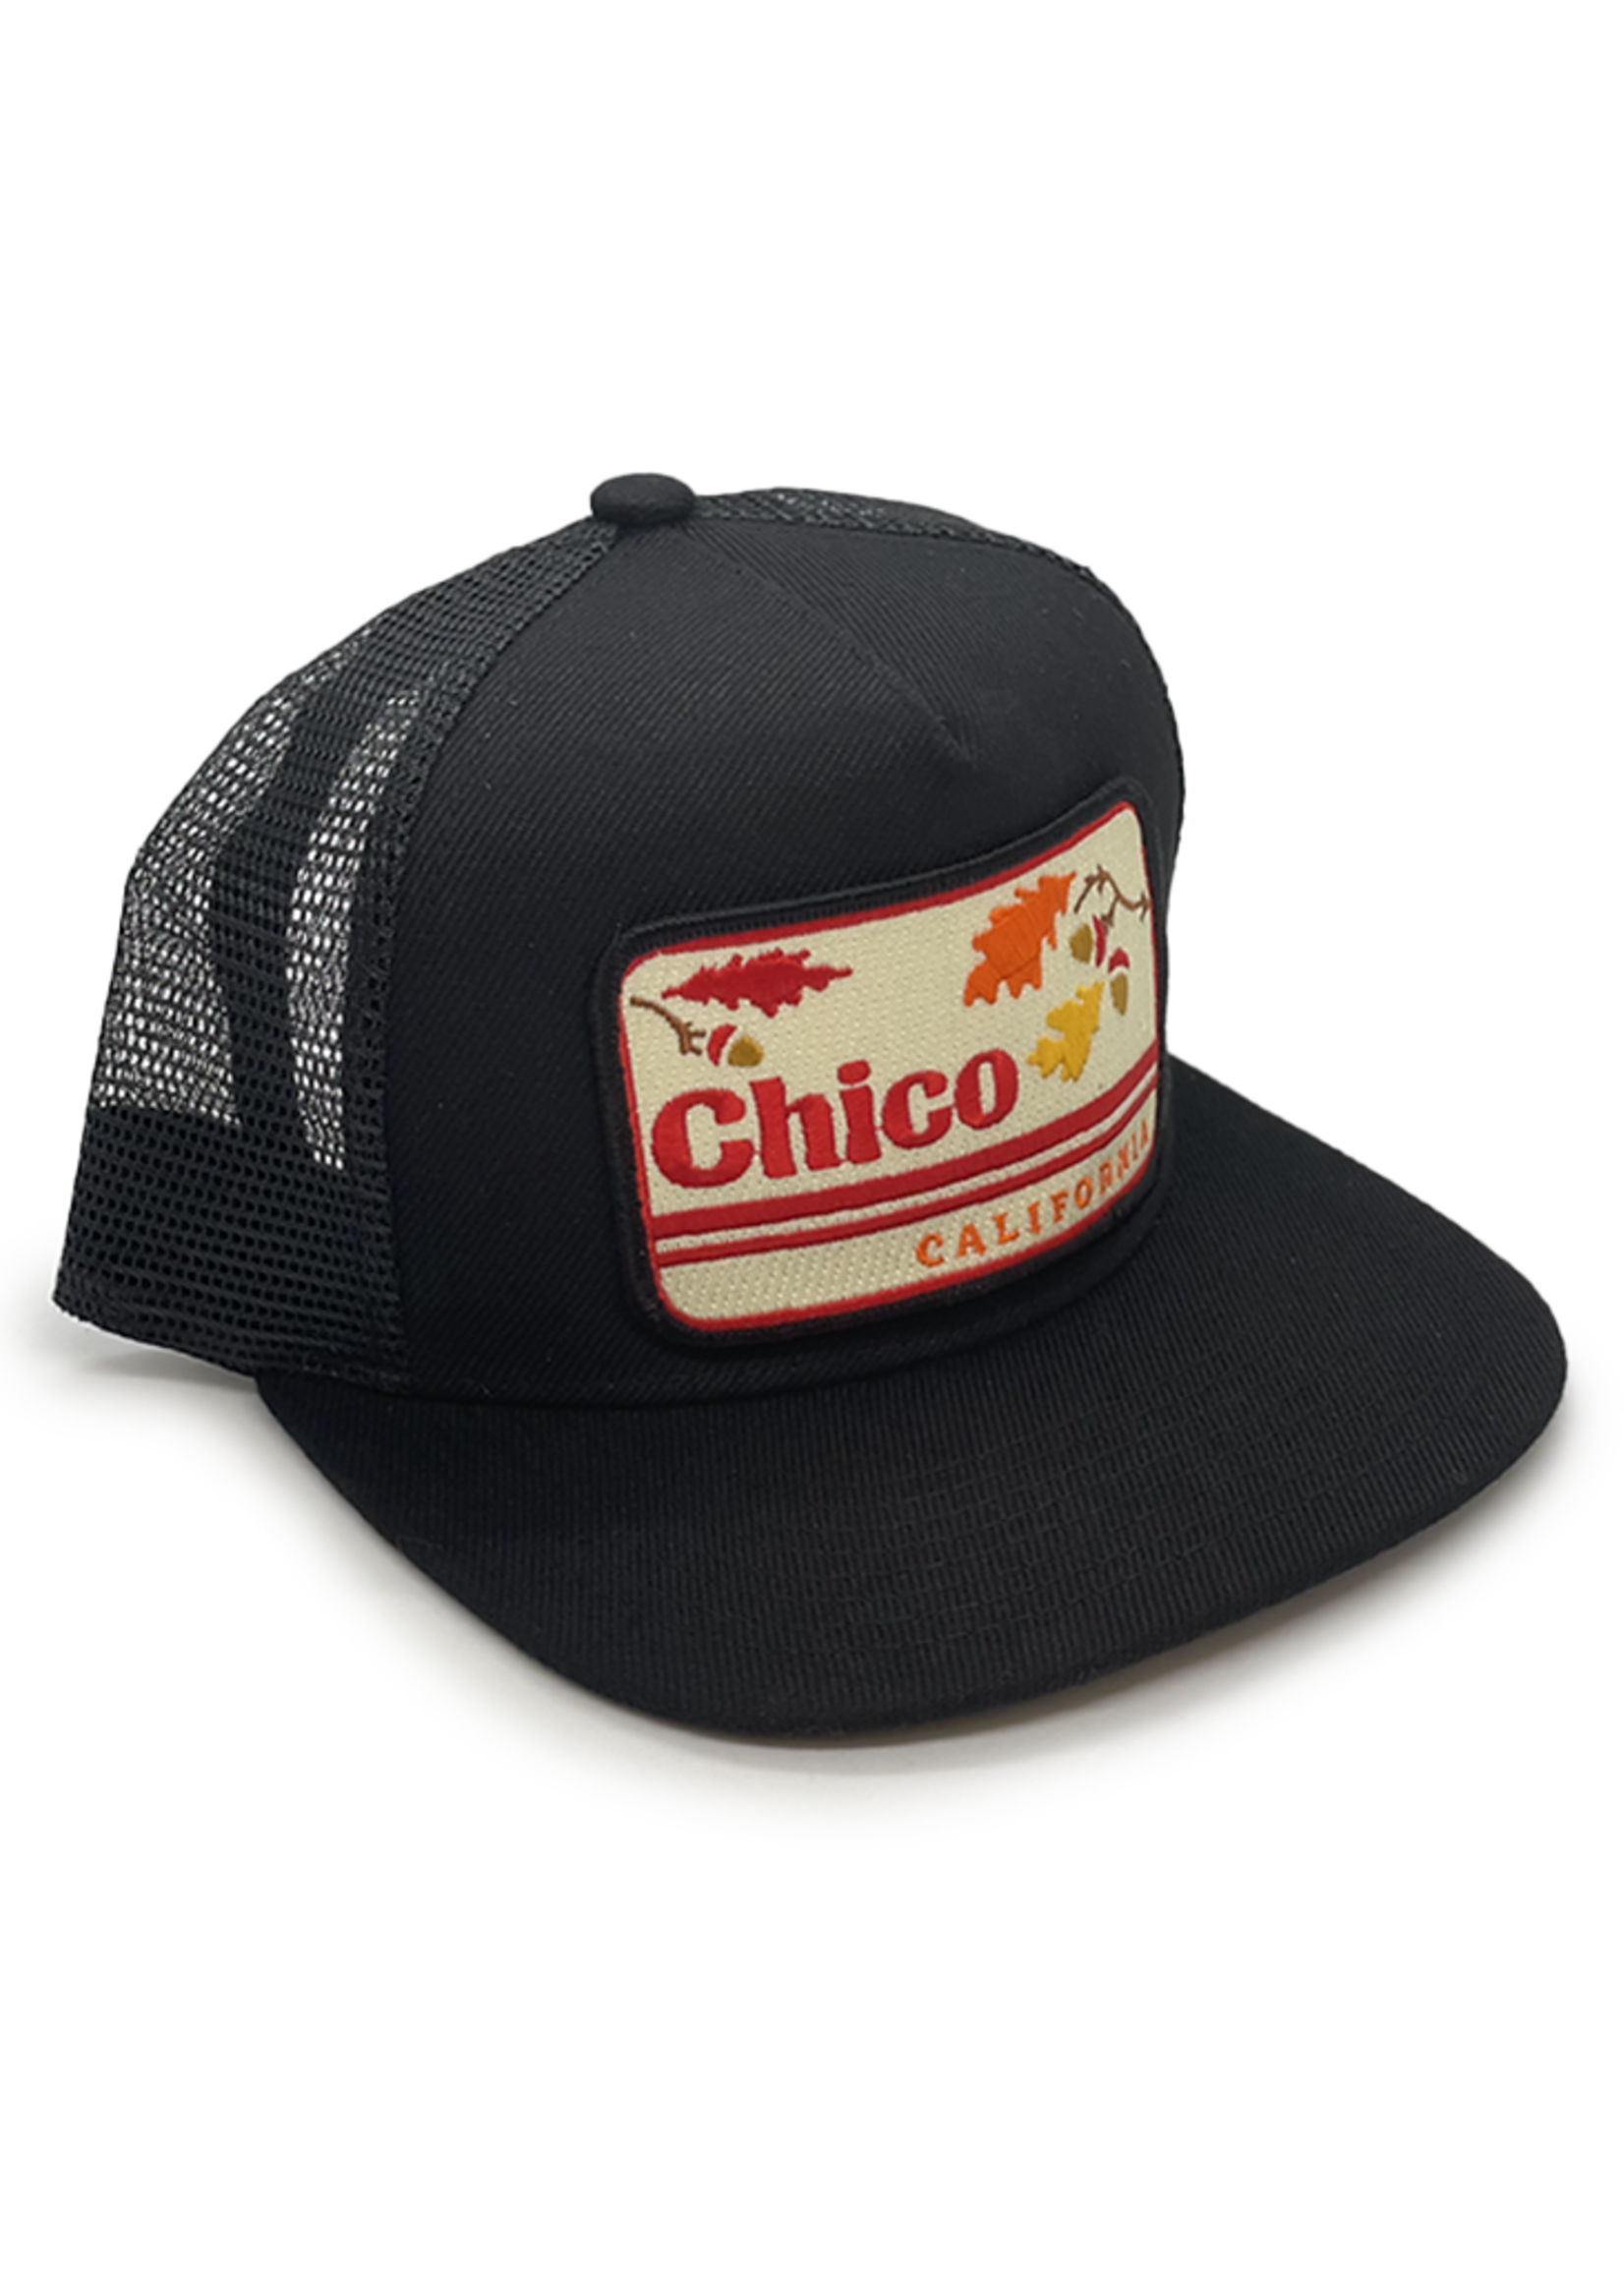 Famous Pocket Trucker Hats Chico CA Leaves